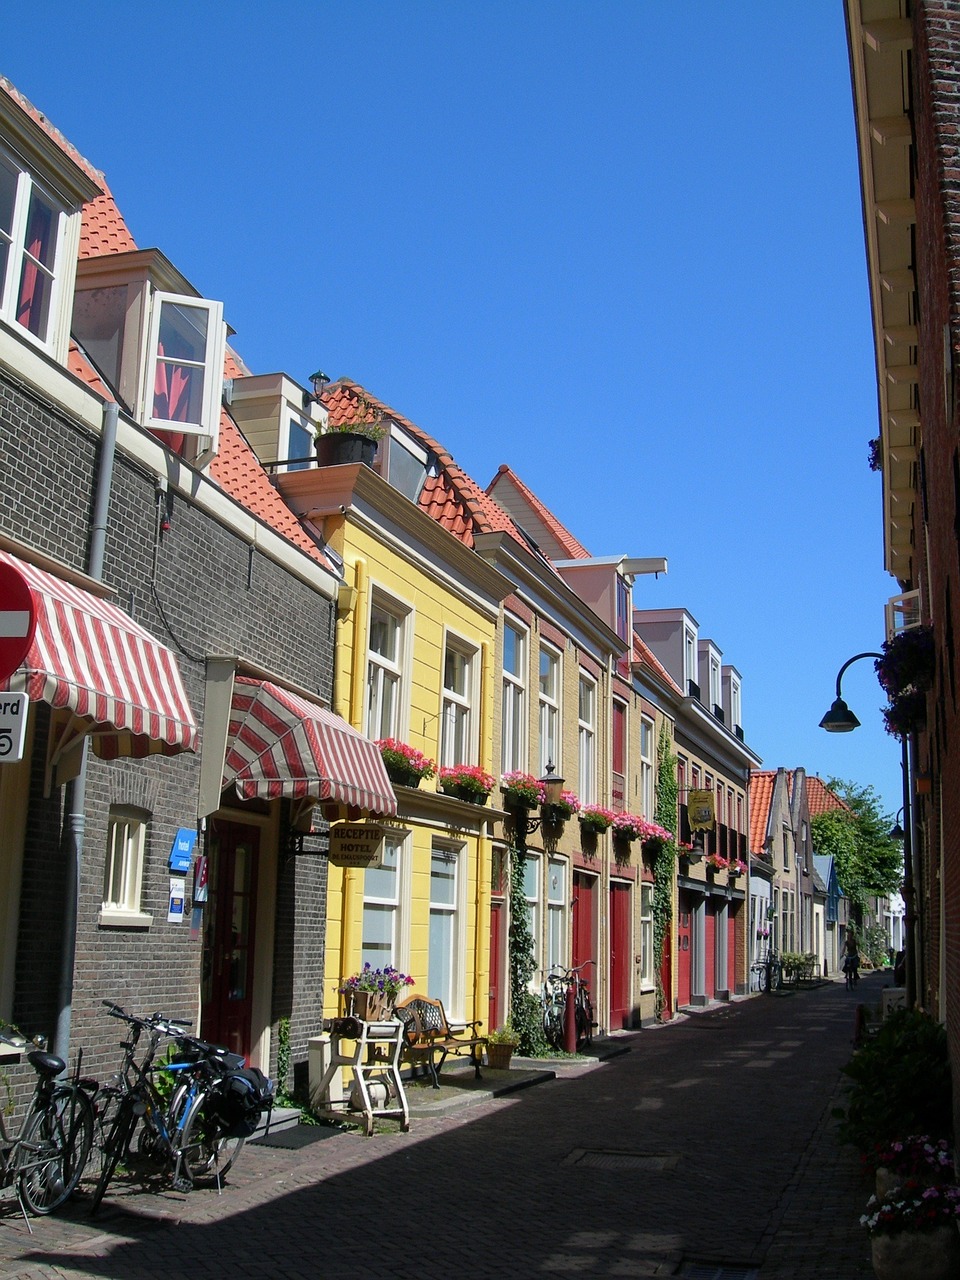 a group of bicycles parked on the side of a street, a photo, by Jan Tengnagel, flickr, de stijl, sunlight and whimsical houses, helmond, colonial era street, coastal